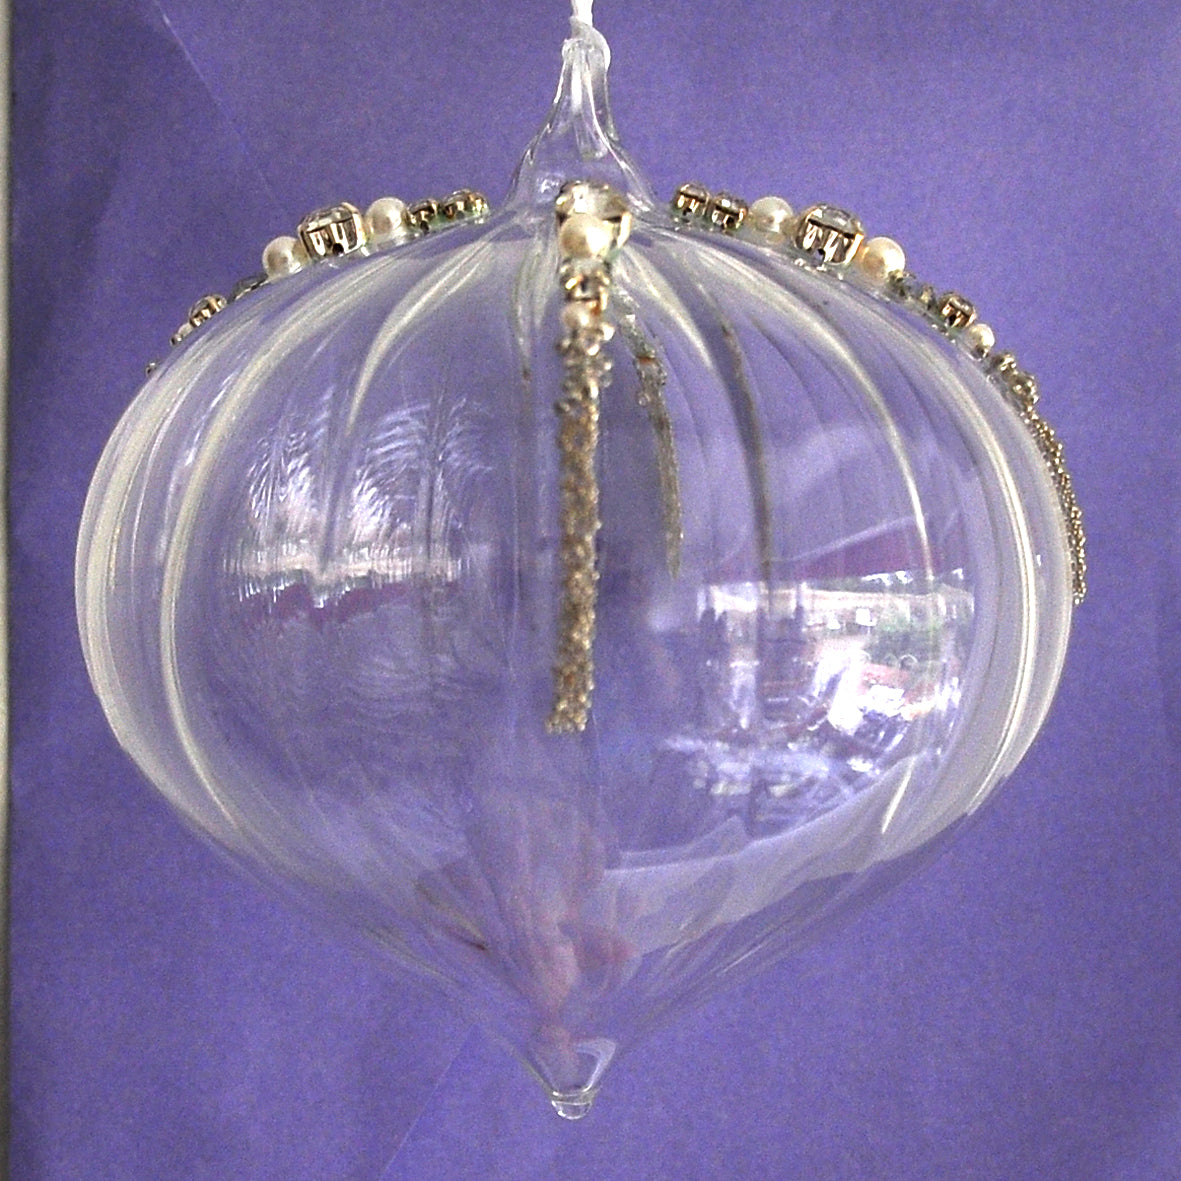 Clear glass hanging Christmas decoration with beads, pearls and diamonte detailing.